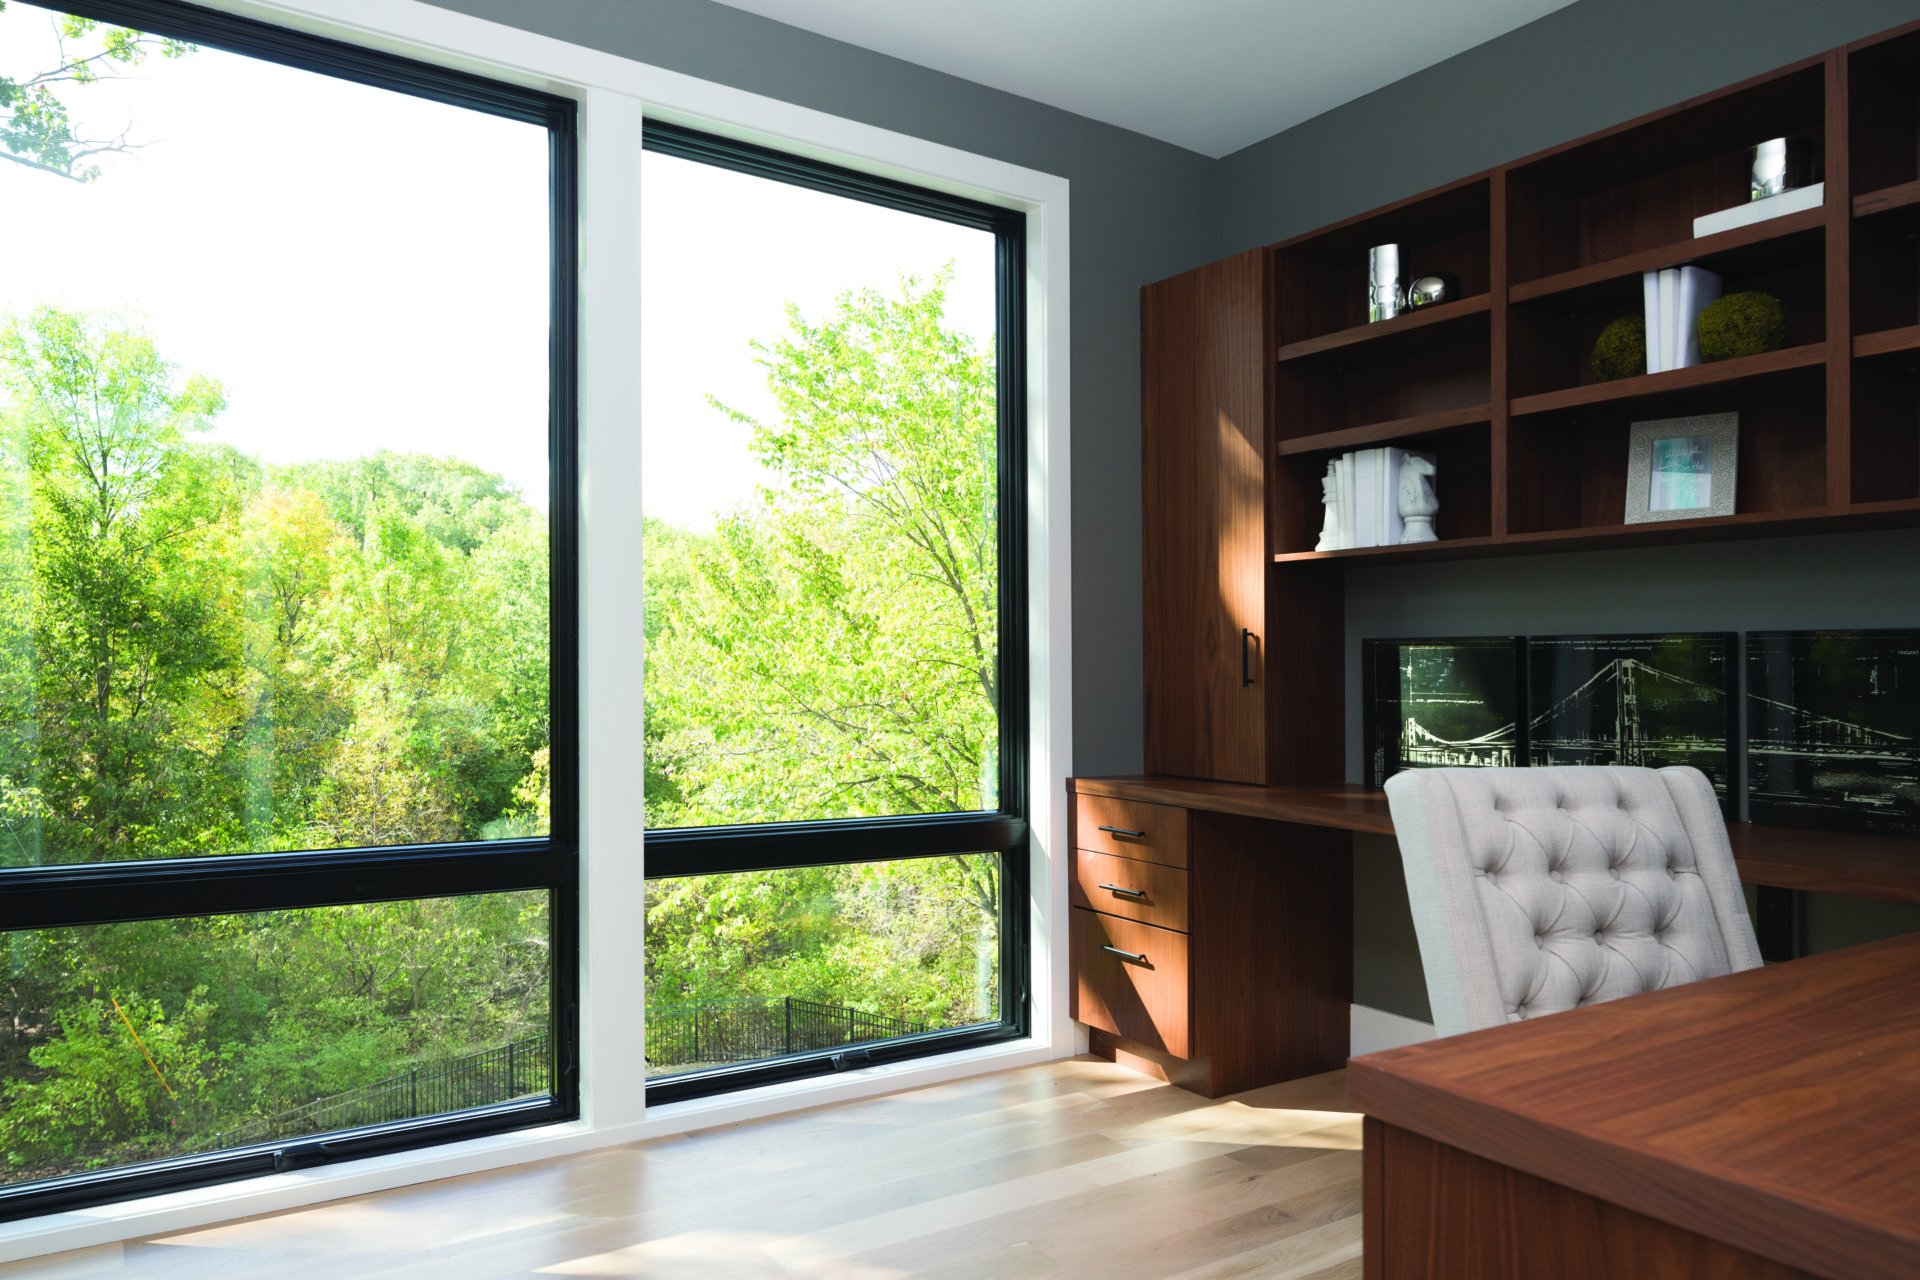 Two large Andersen 400 series awning picture windows overlook a park from the interior of a home office with a dark wood desk and white desk chair.